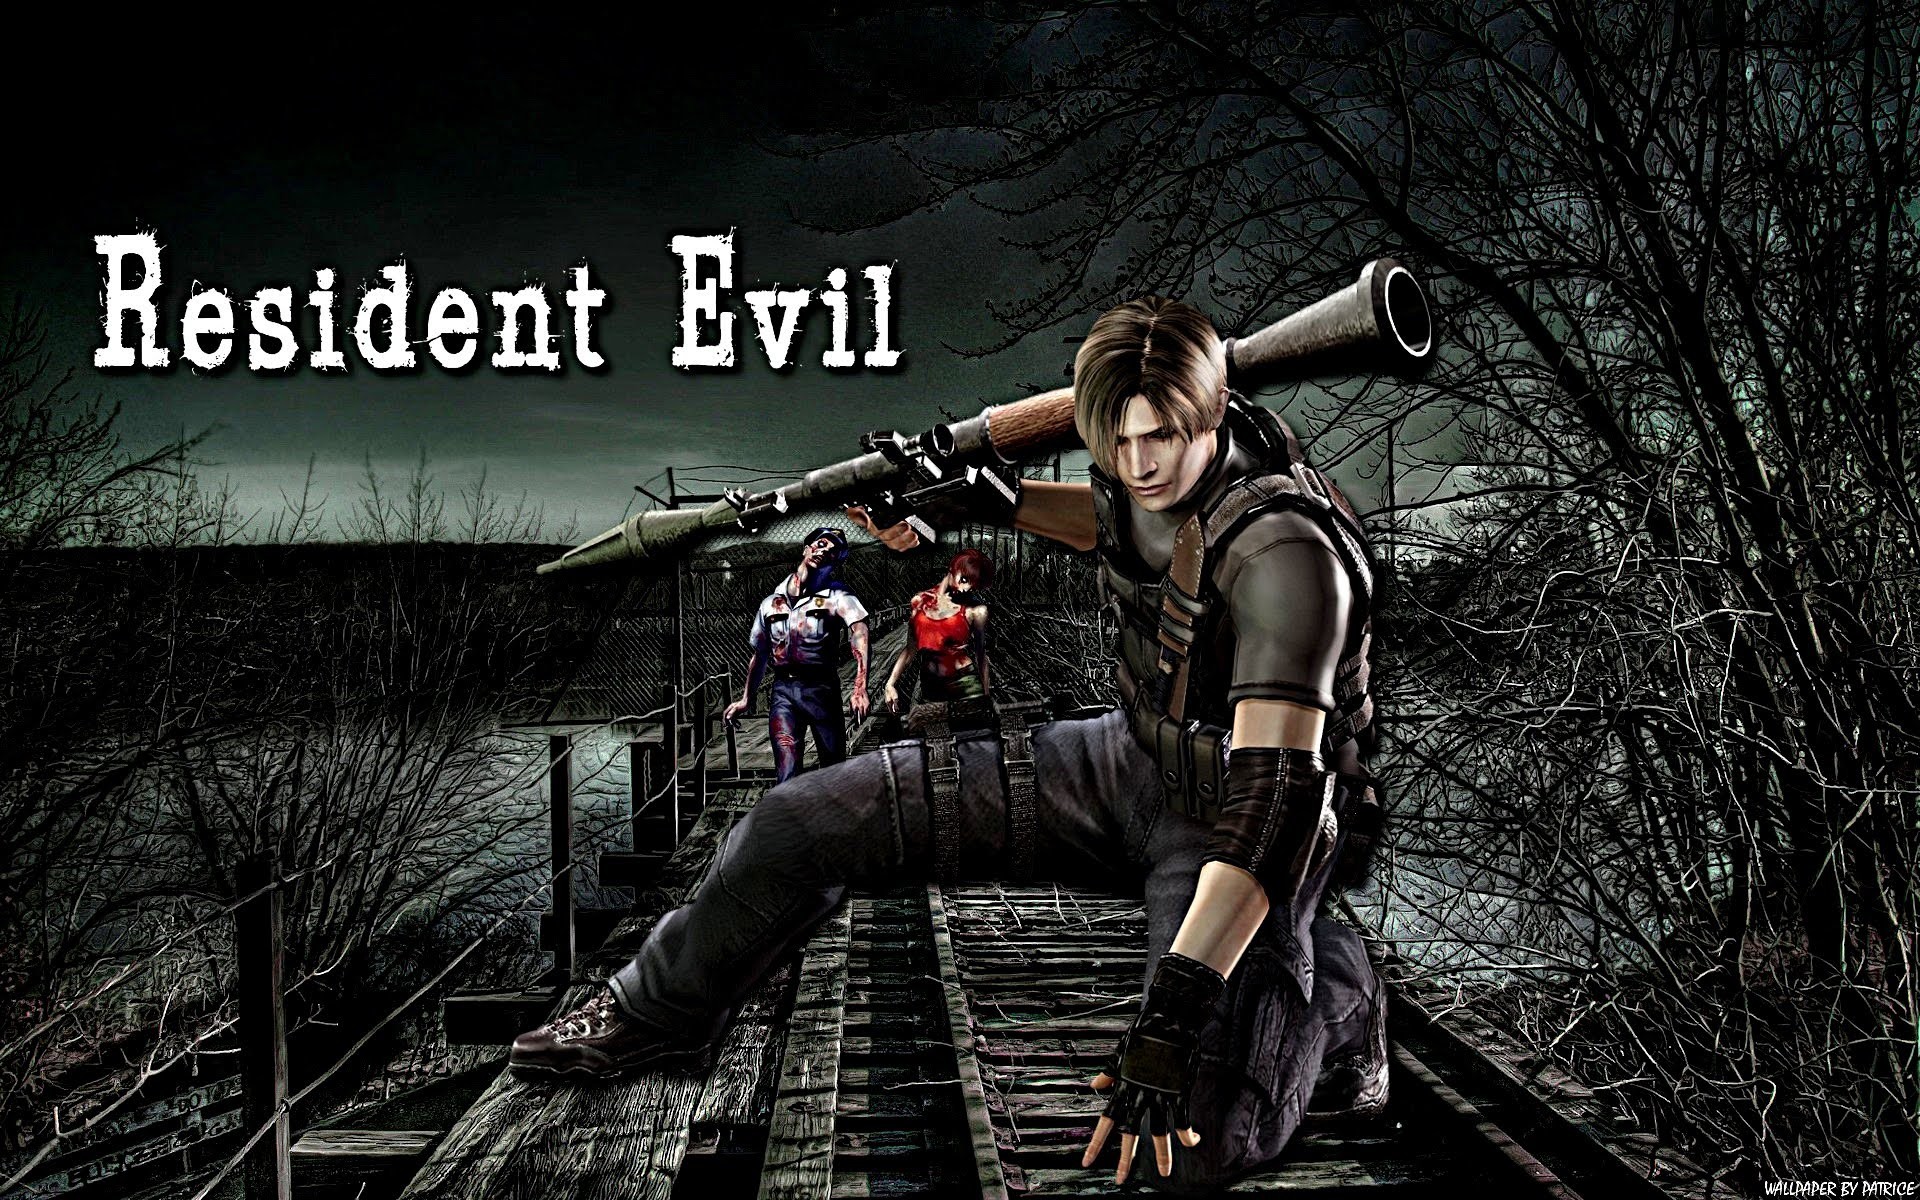 1920x1200 resident evil images REV D HD wallpaper and background photos 1920Ã1200